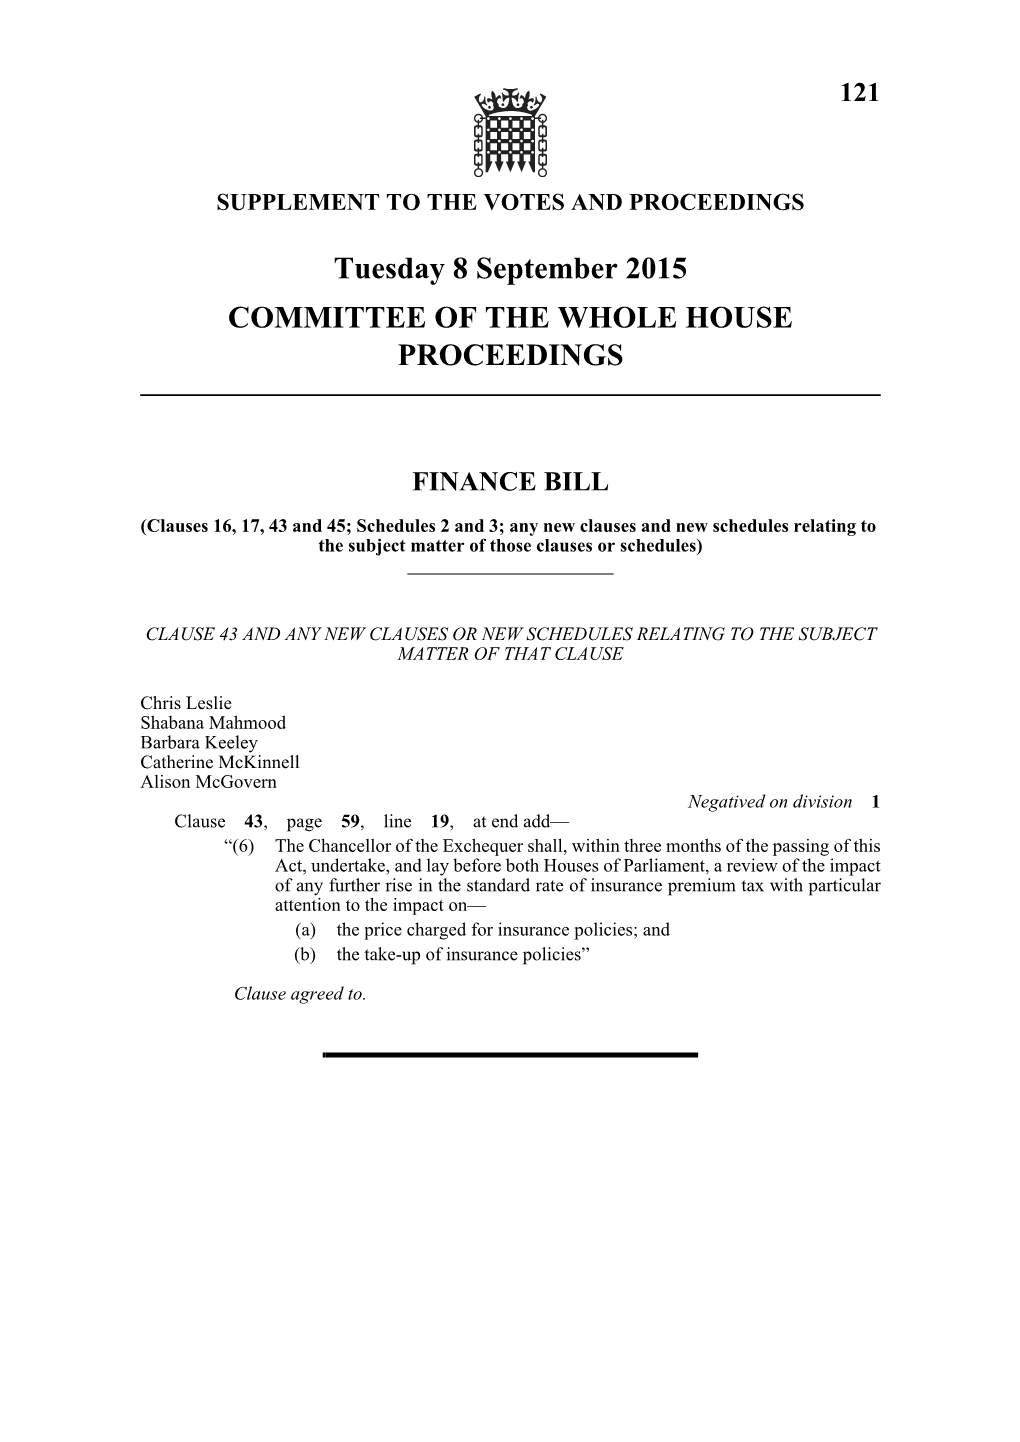 Tuesday 8 September 2015 COMMITTEE of the WHOLE HOUSE PROCEEDINGS